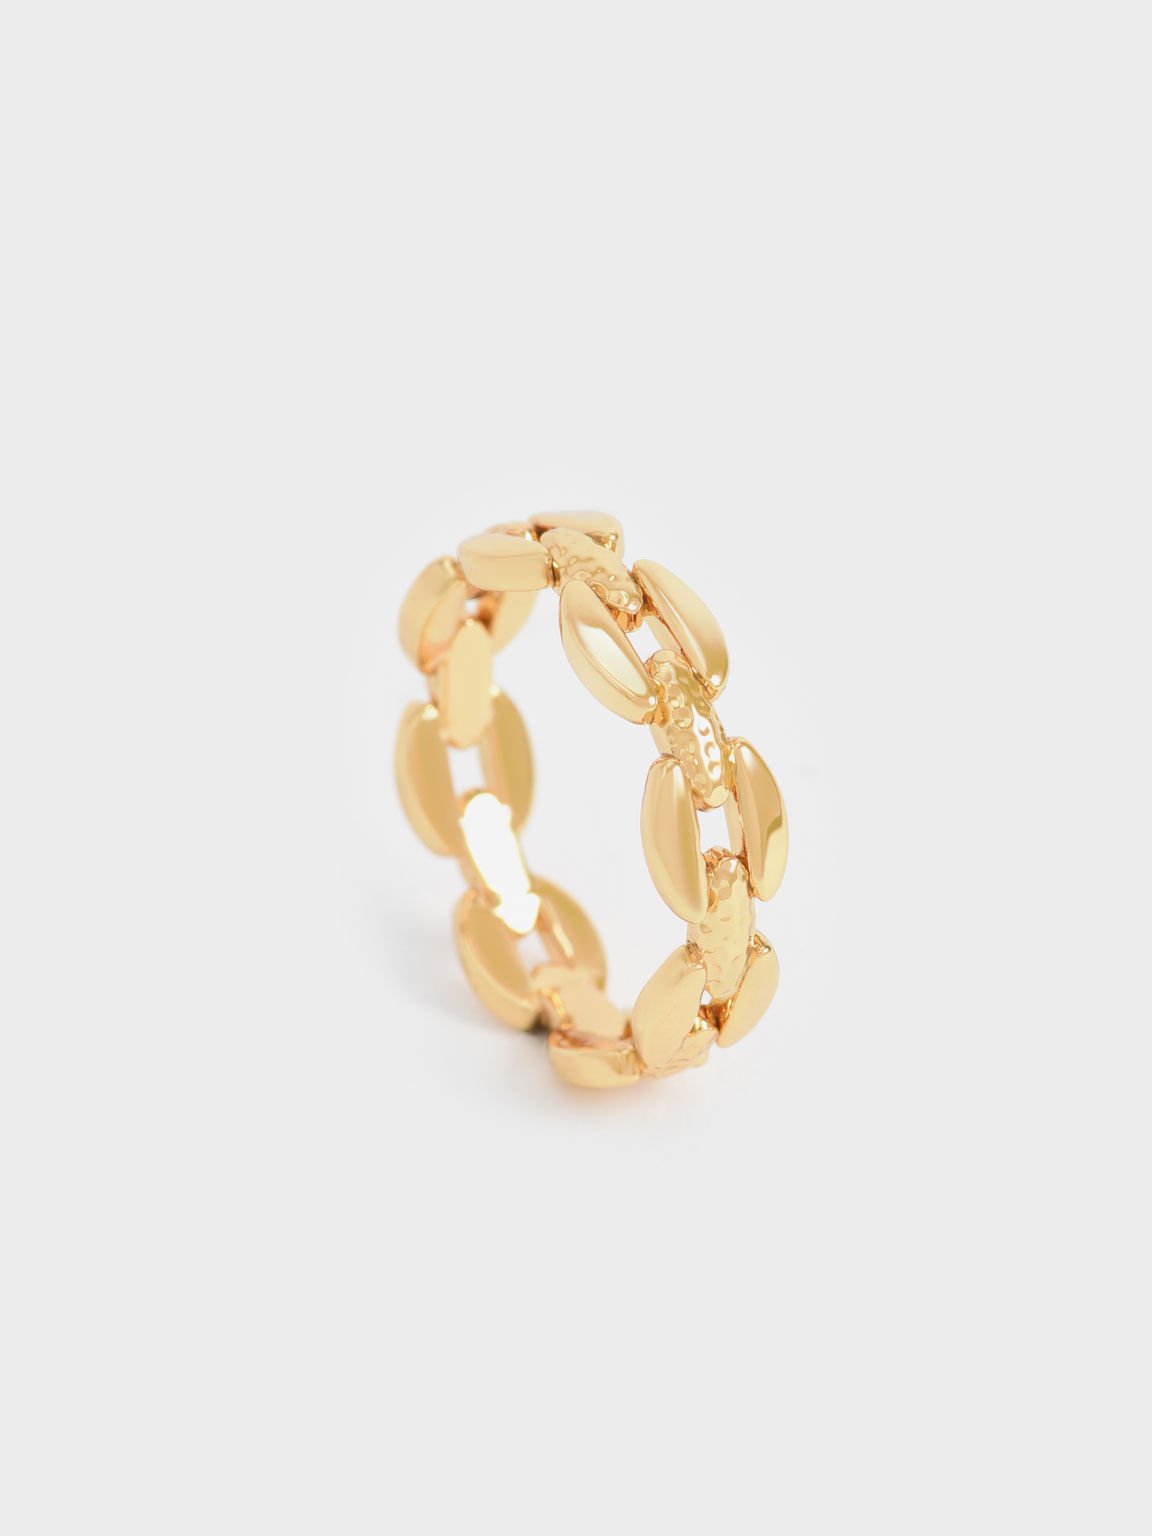 Chain-Link Ring, Gold, hi-res